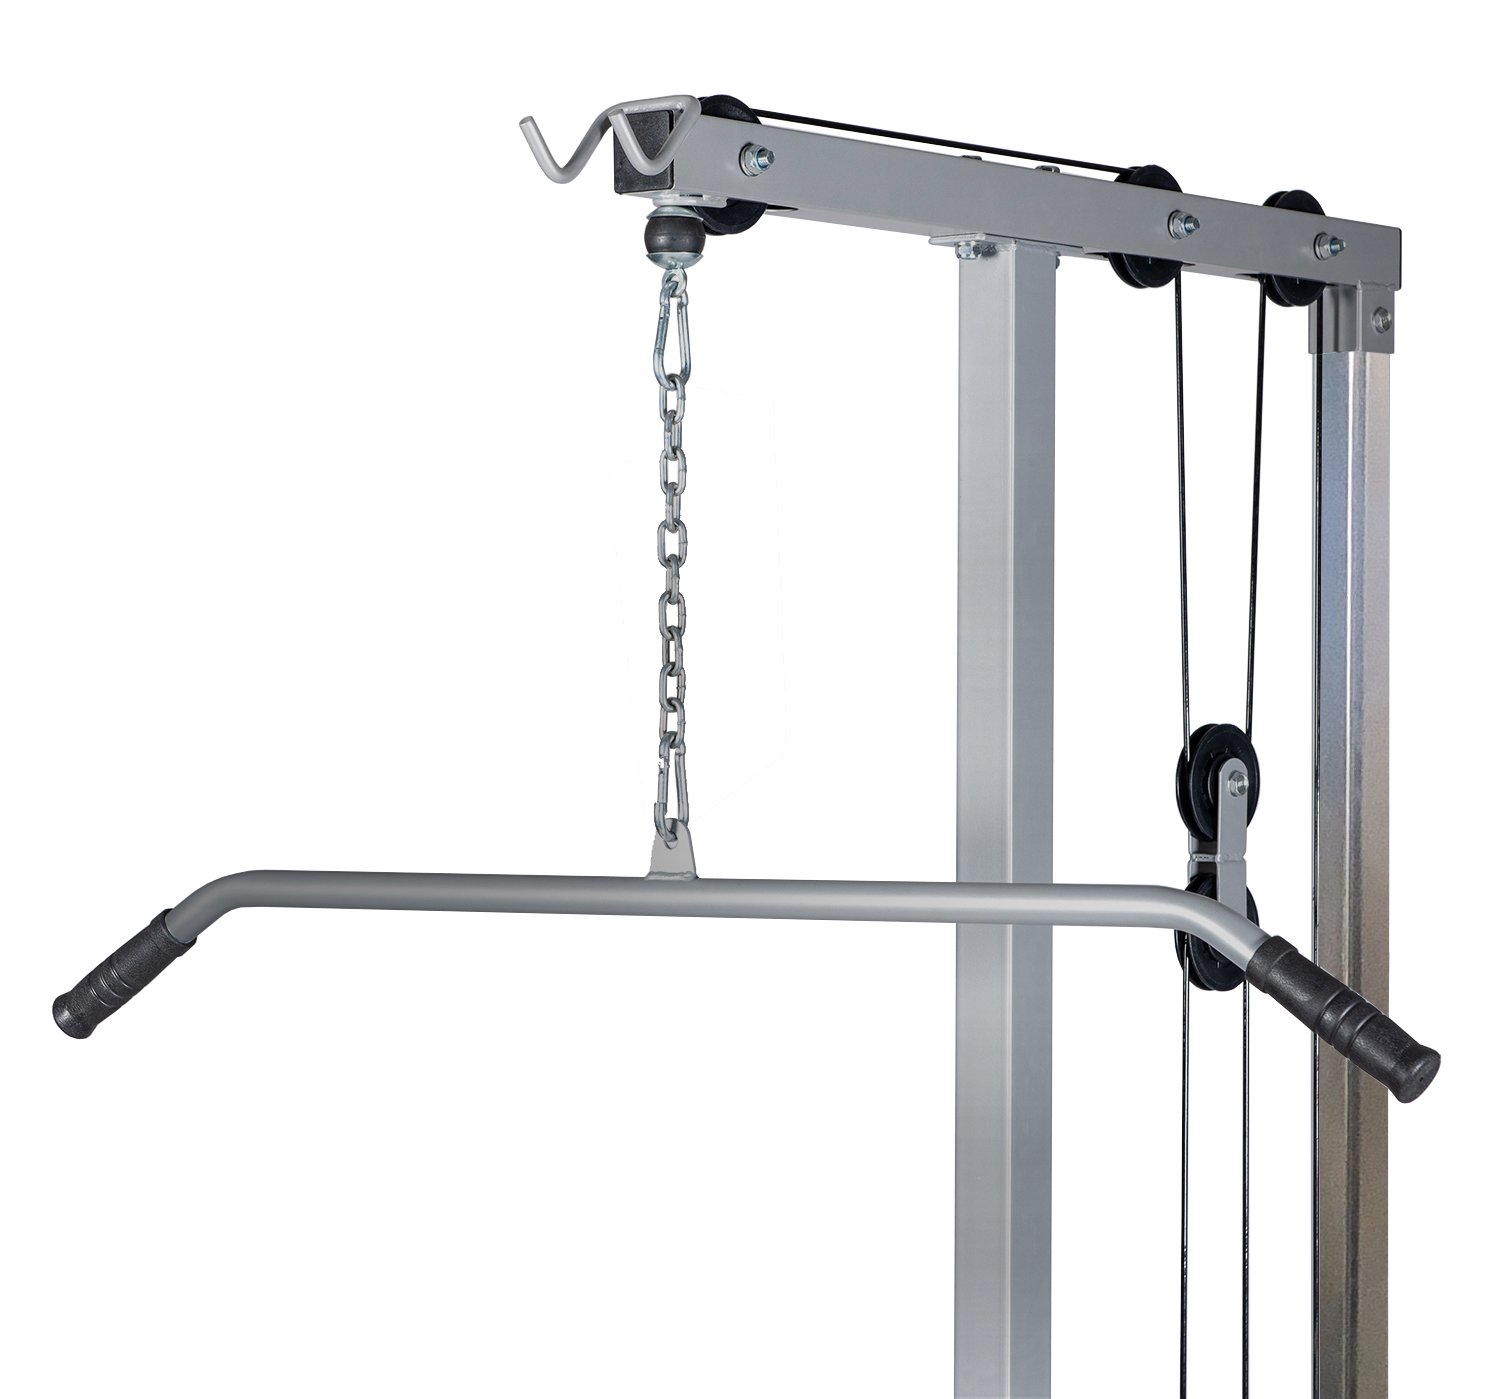 Lat Pull Down Machine Multifunction Low Row Bar Cable Fitness Body Workout Gym - image 4 of 6